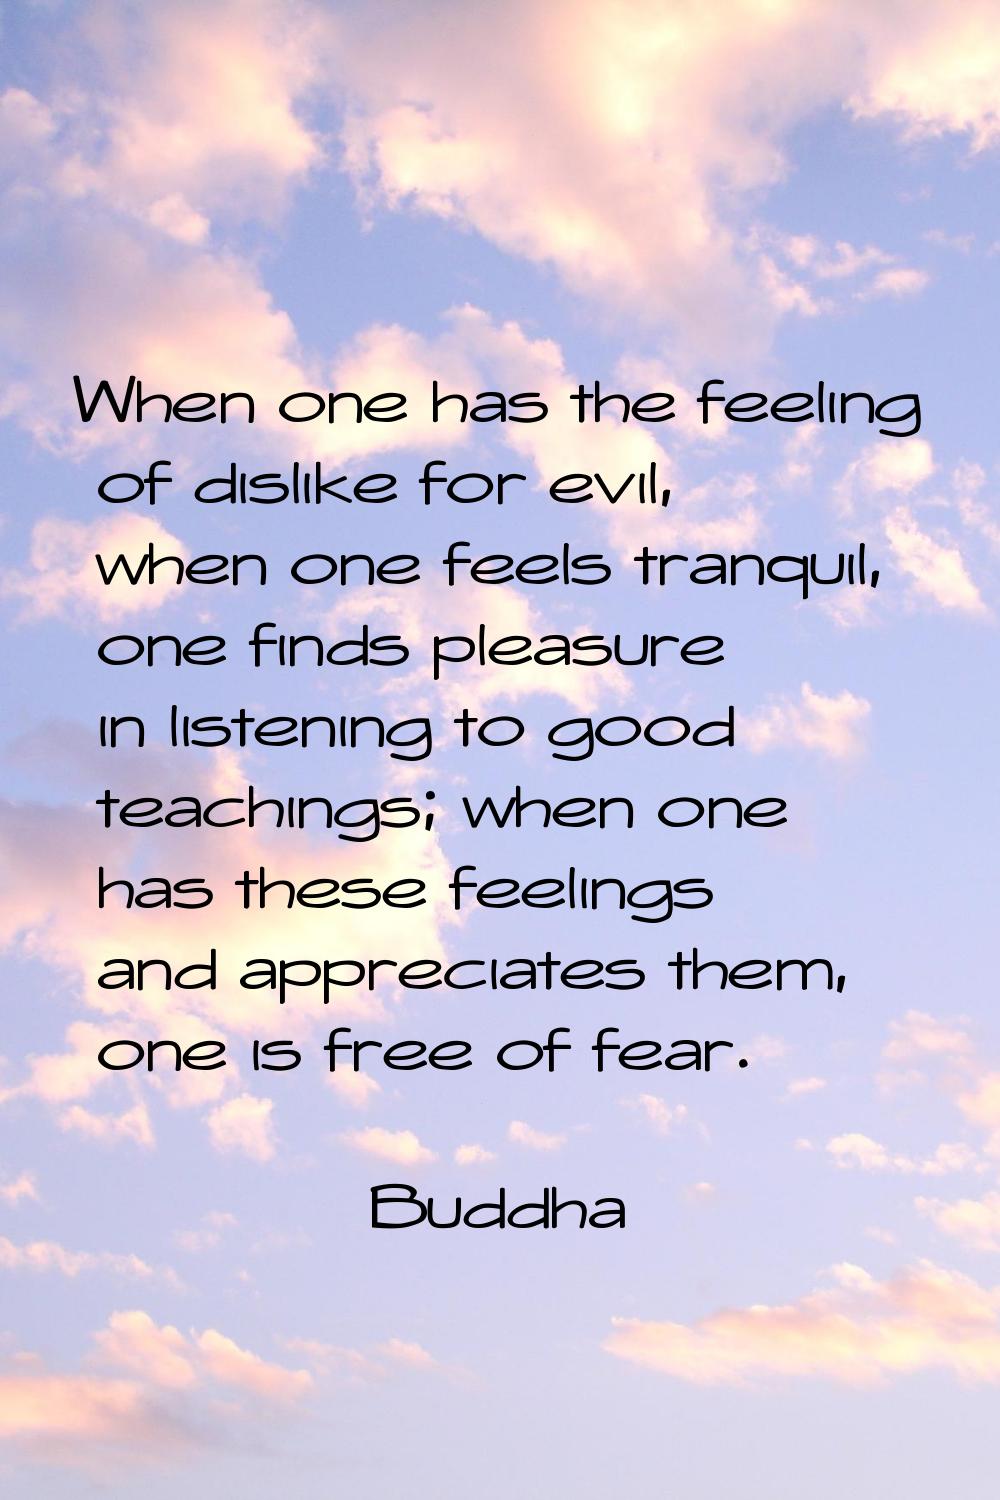 When one has the feeling of dislike for evil, when one feels tranquil, one finds pleasure in listen